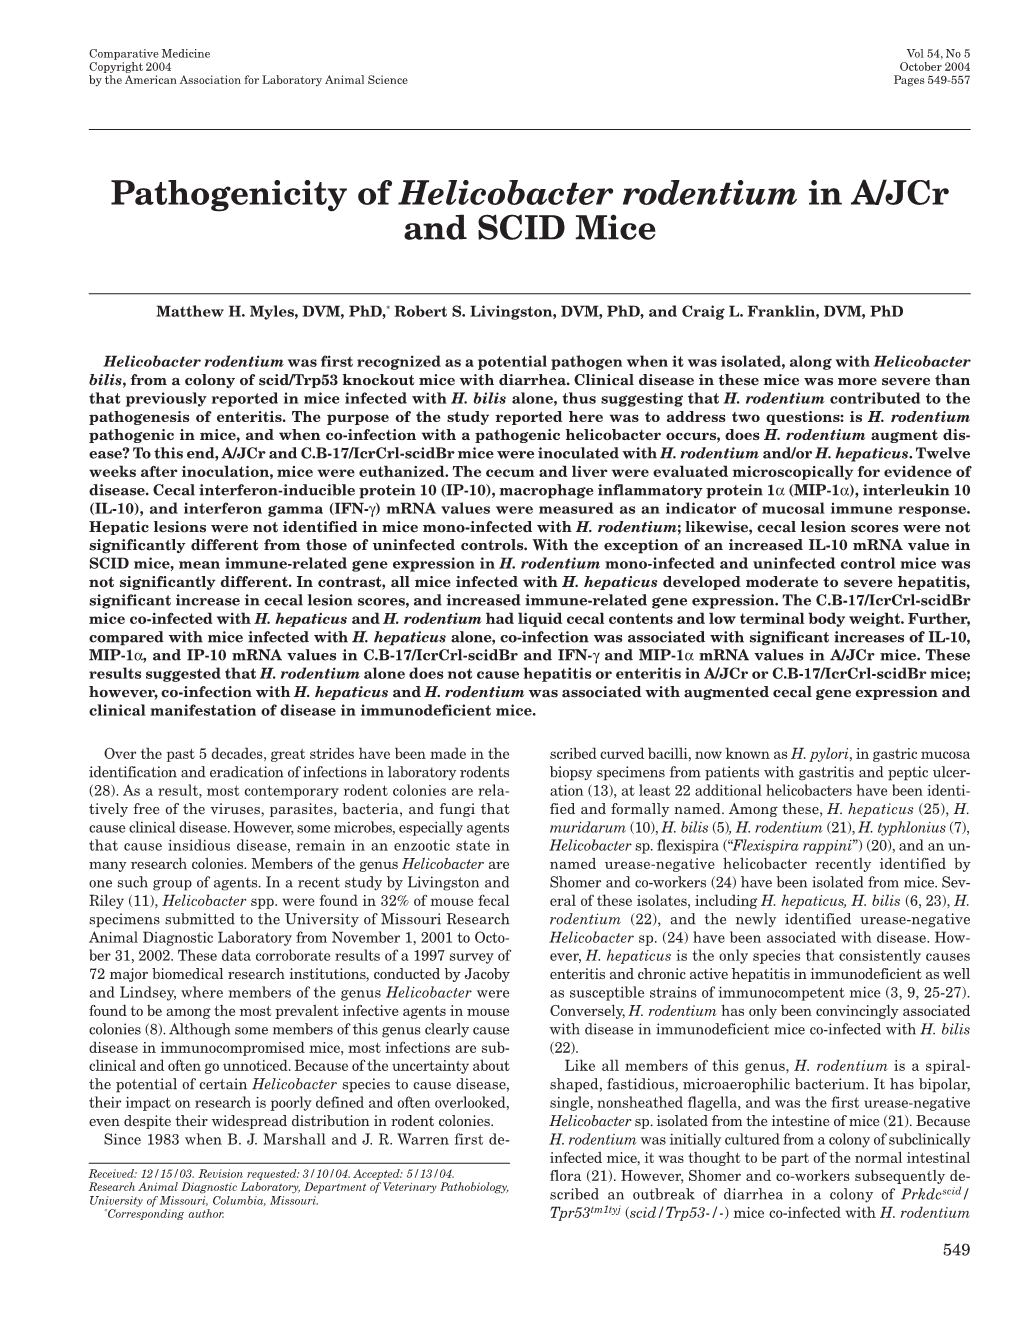 Pathogenicity of &lt;I&gt;Helicobacter Rodentium&lt;/I&gt; in A/Jcr and SCID Mice